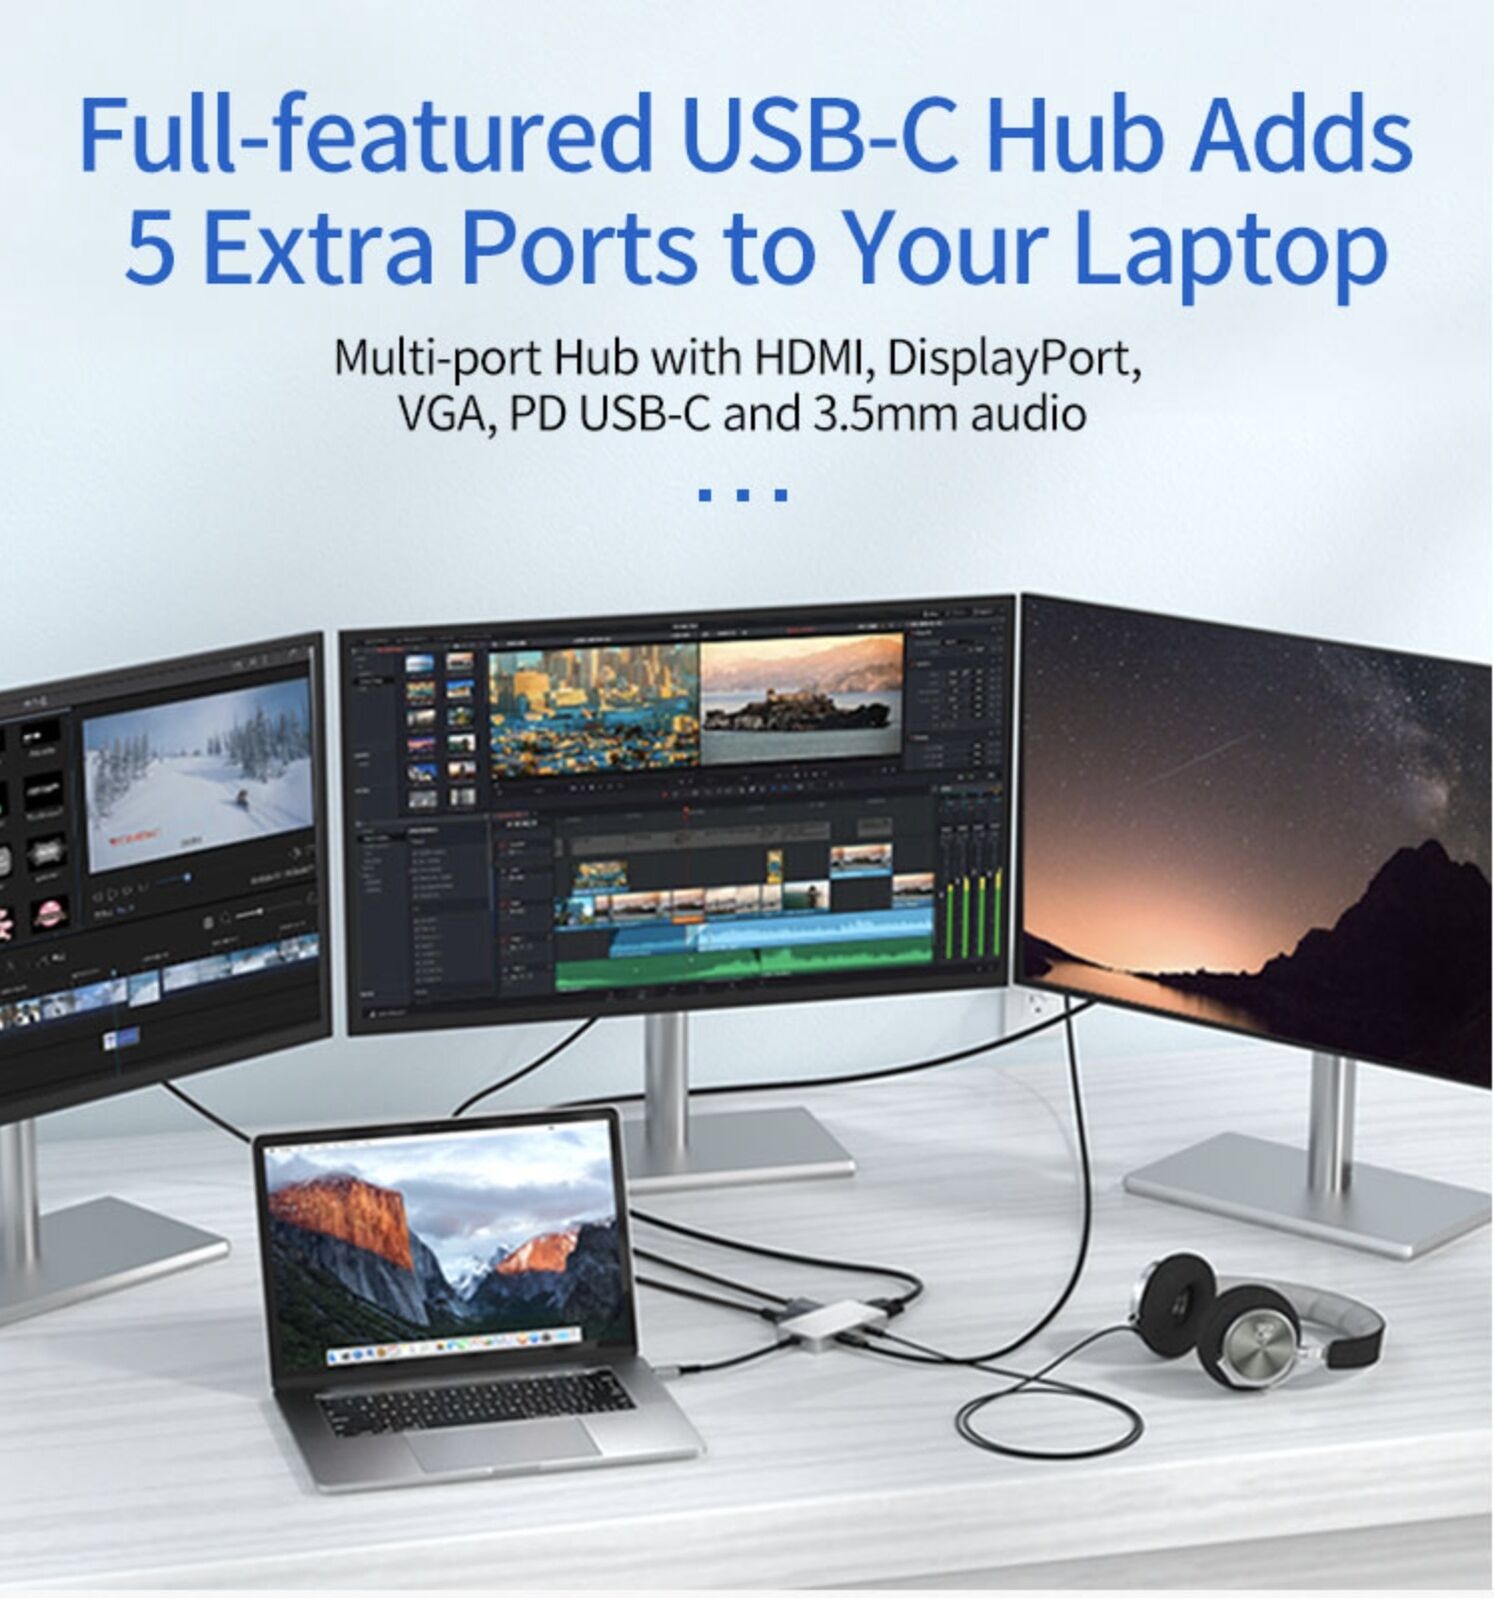 USB-C 5-in-1 Hub with 4K DP, HDMI, VGA + Audio 3.5mm and PD (100W)